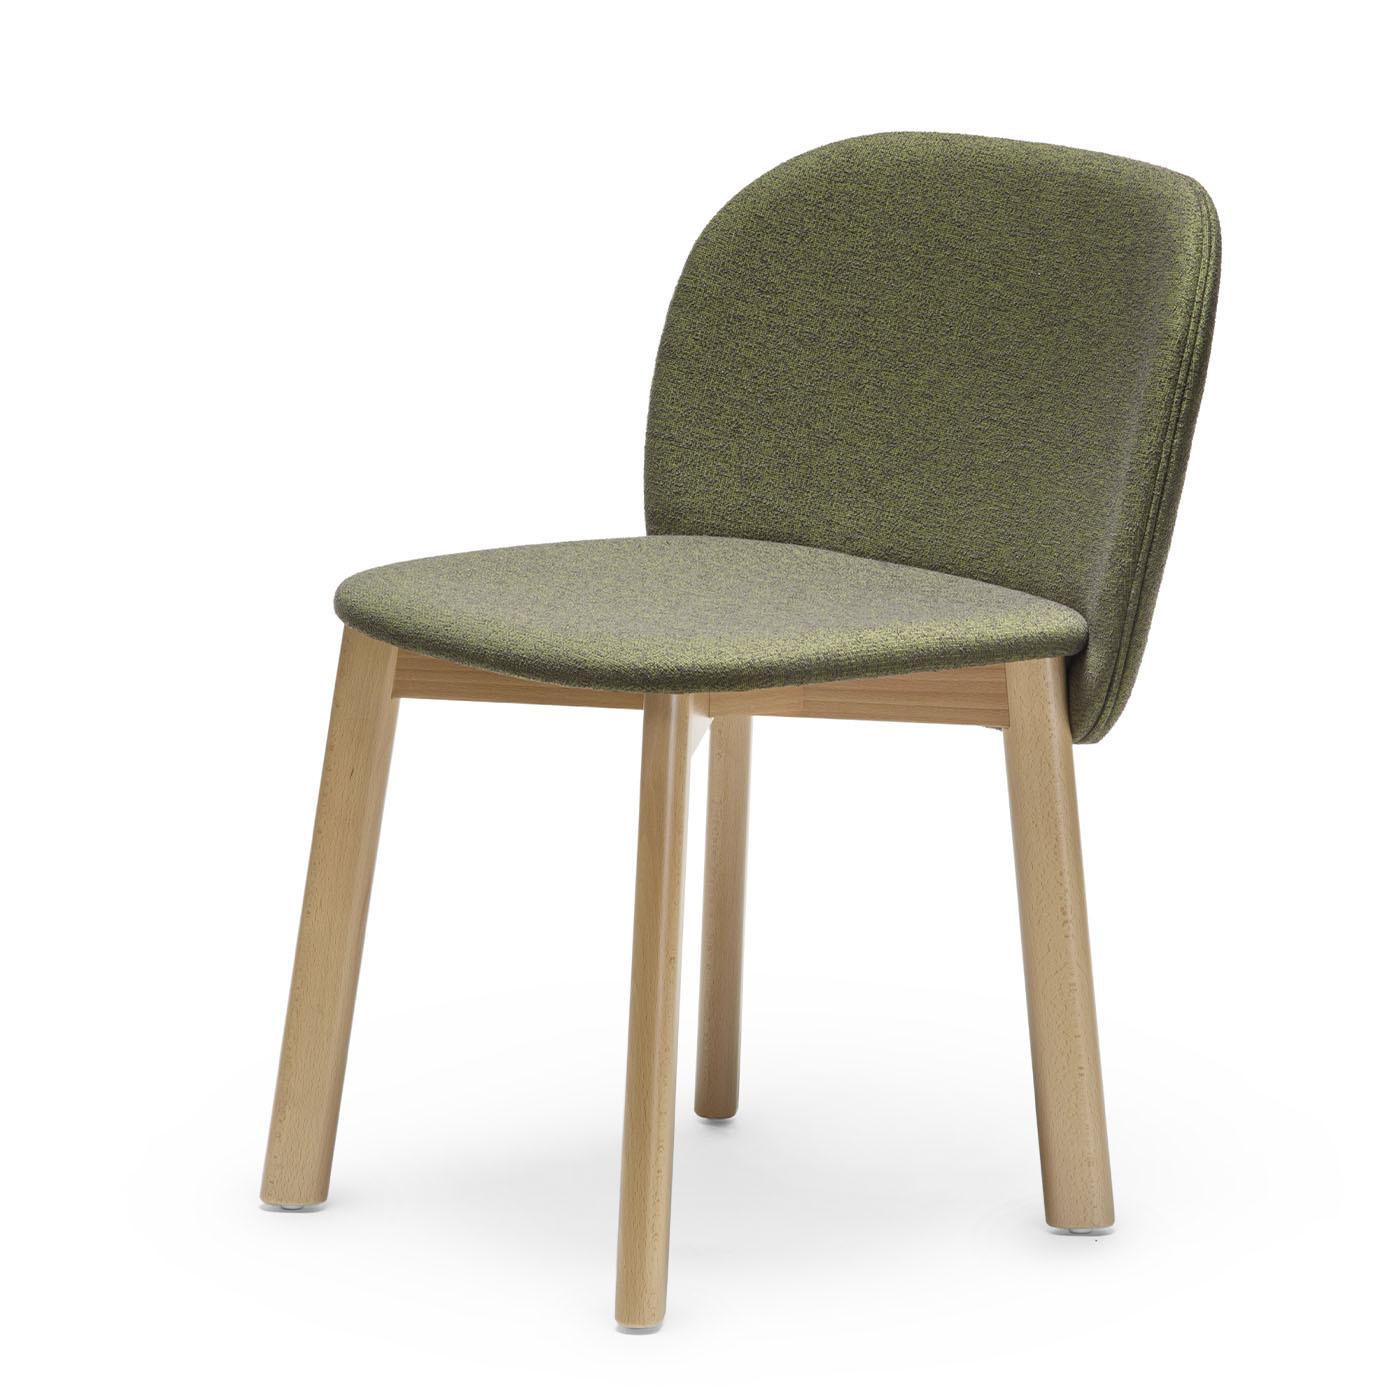 Sleek and slick, the Chips collection is a true eye-catcher, with its unmistakably upbeat, trendy style. The back of the chair is without doubt its most iconic and characterizing feature. With its ample curves and generous size, it almost seems to